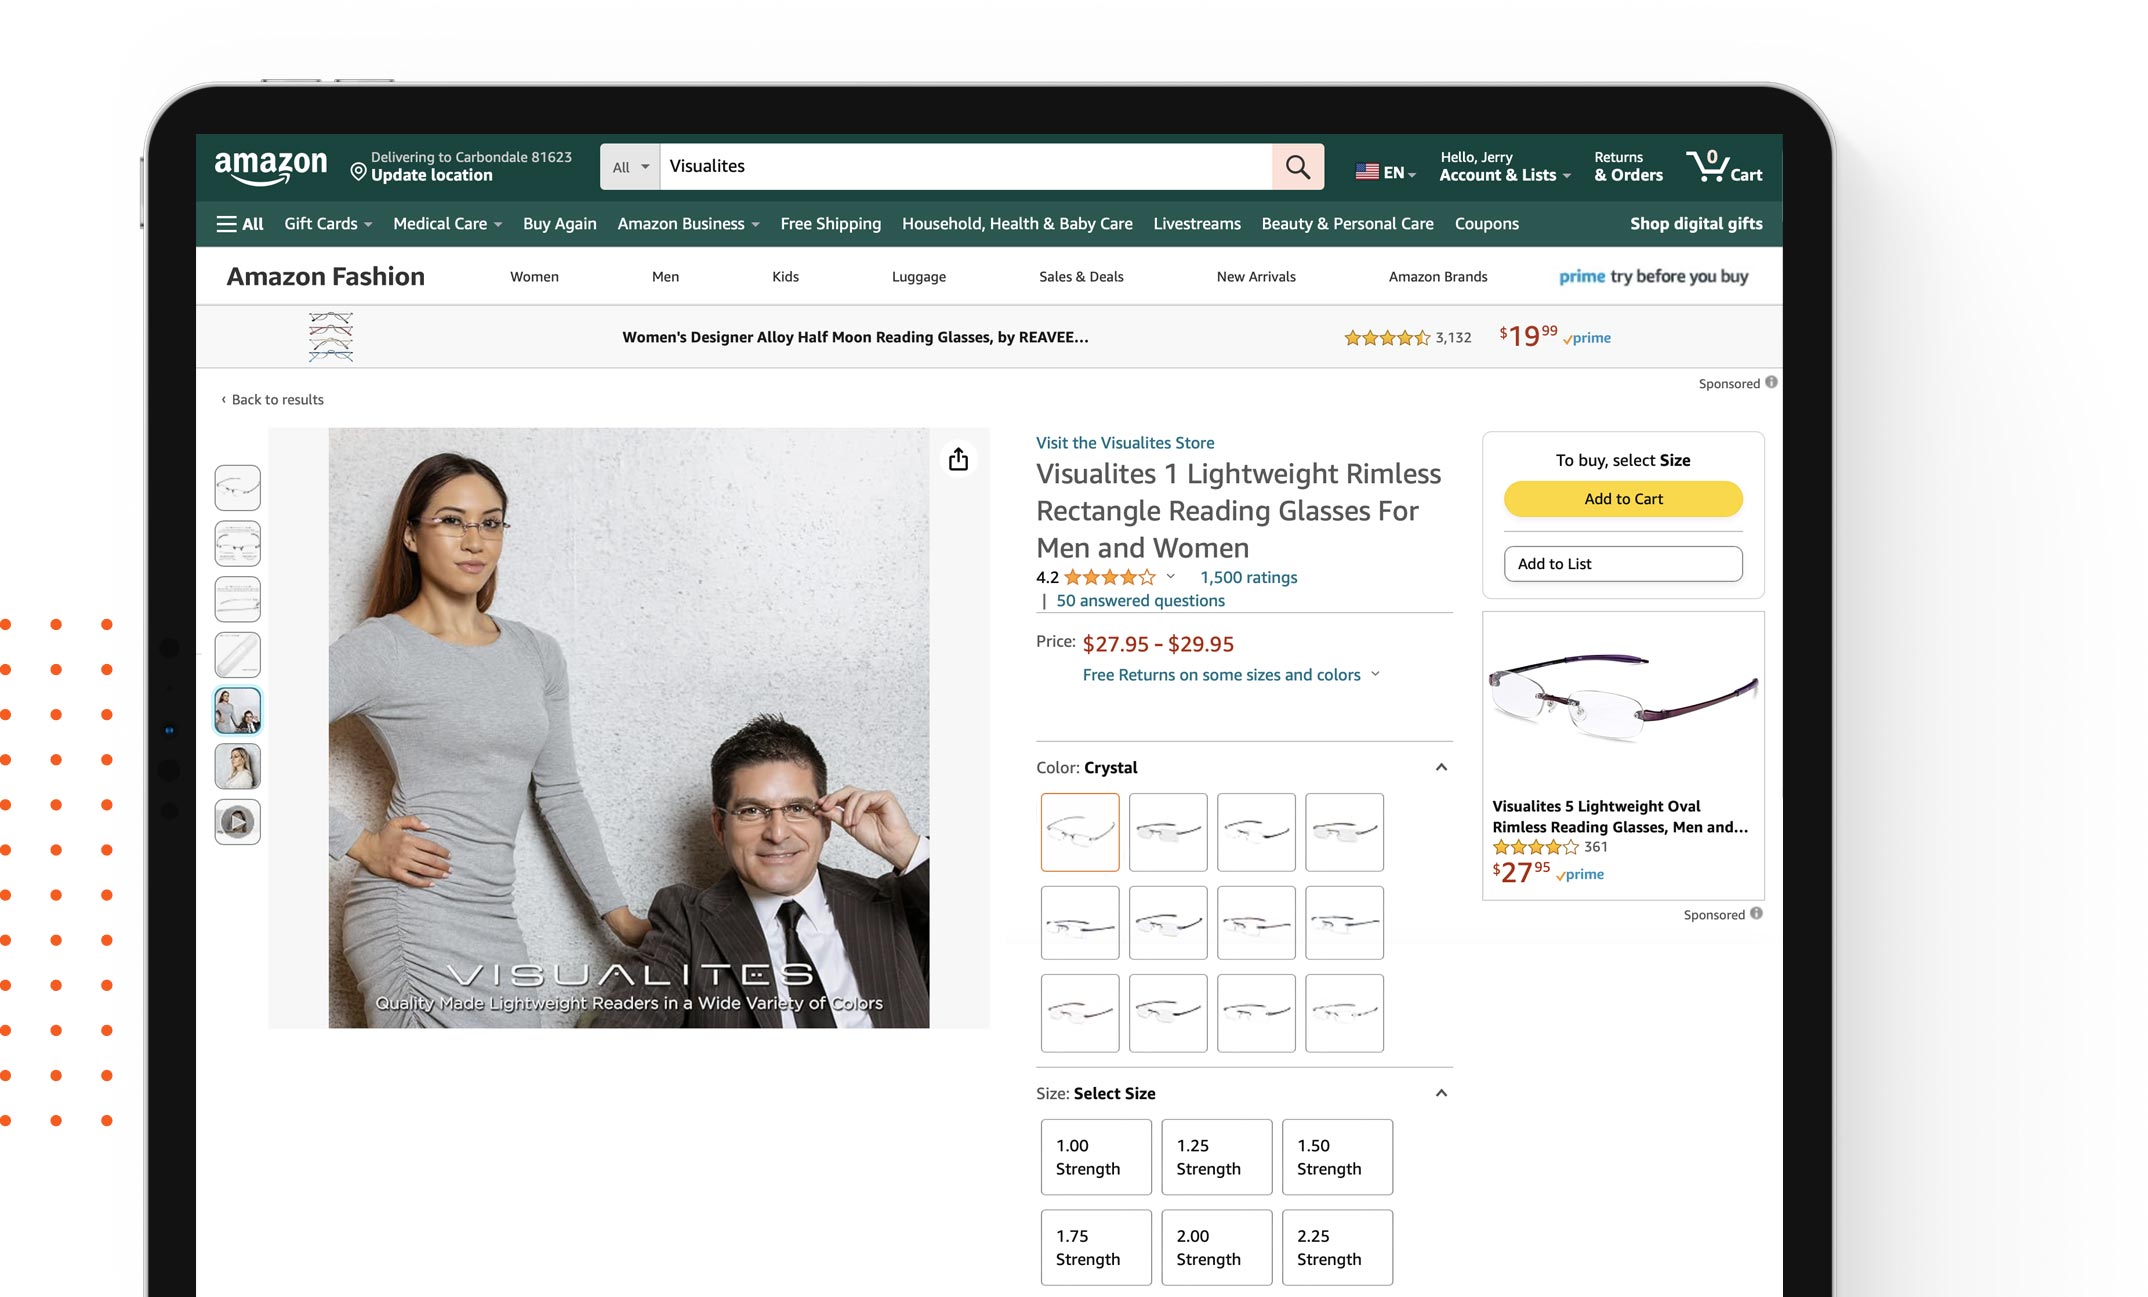 Example of Amazon Product Set Up and Advertising Services